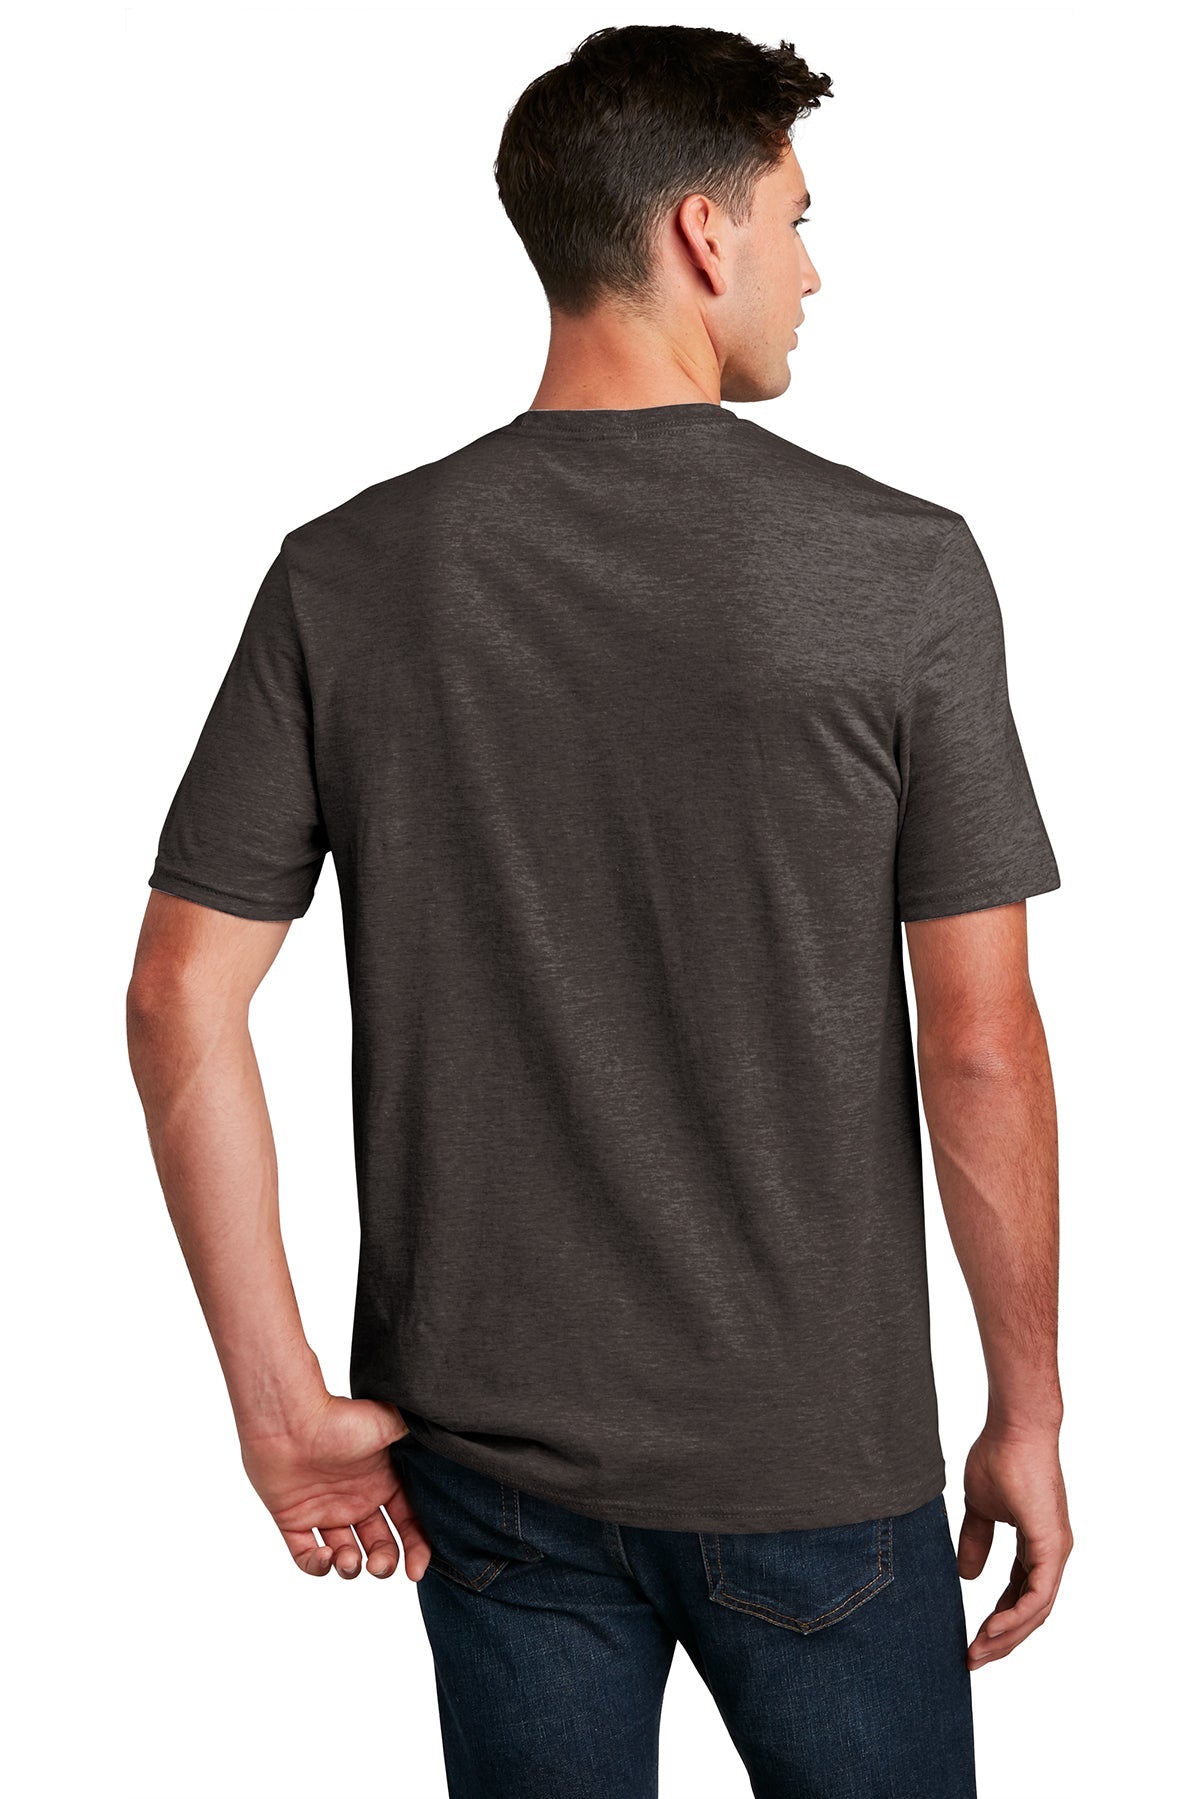 District Made Mens Perfect Blend Tee's, Heathered Brown